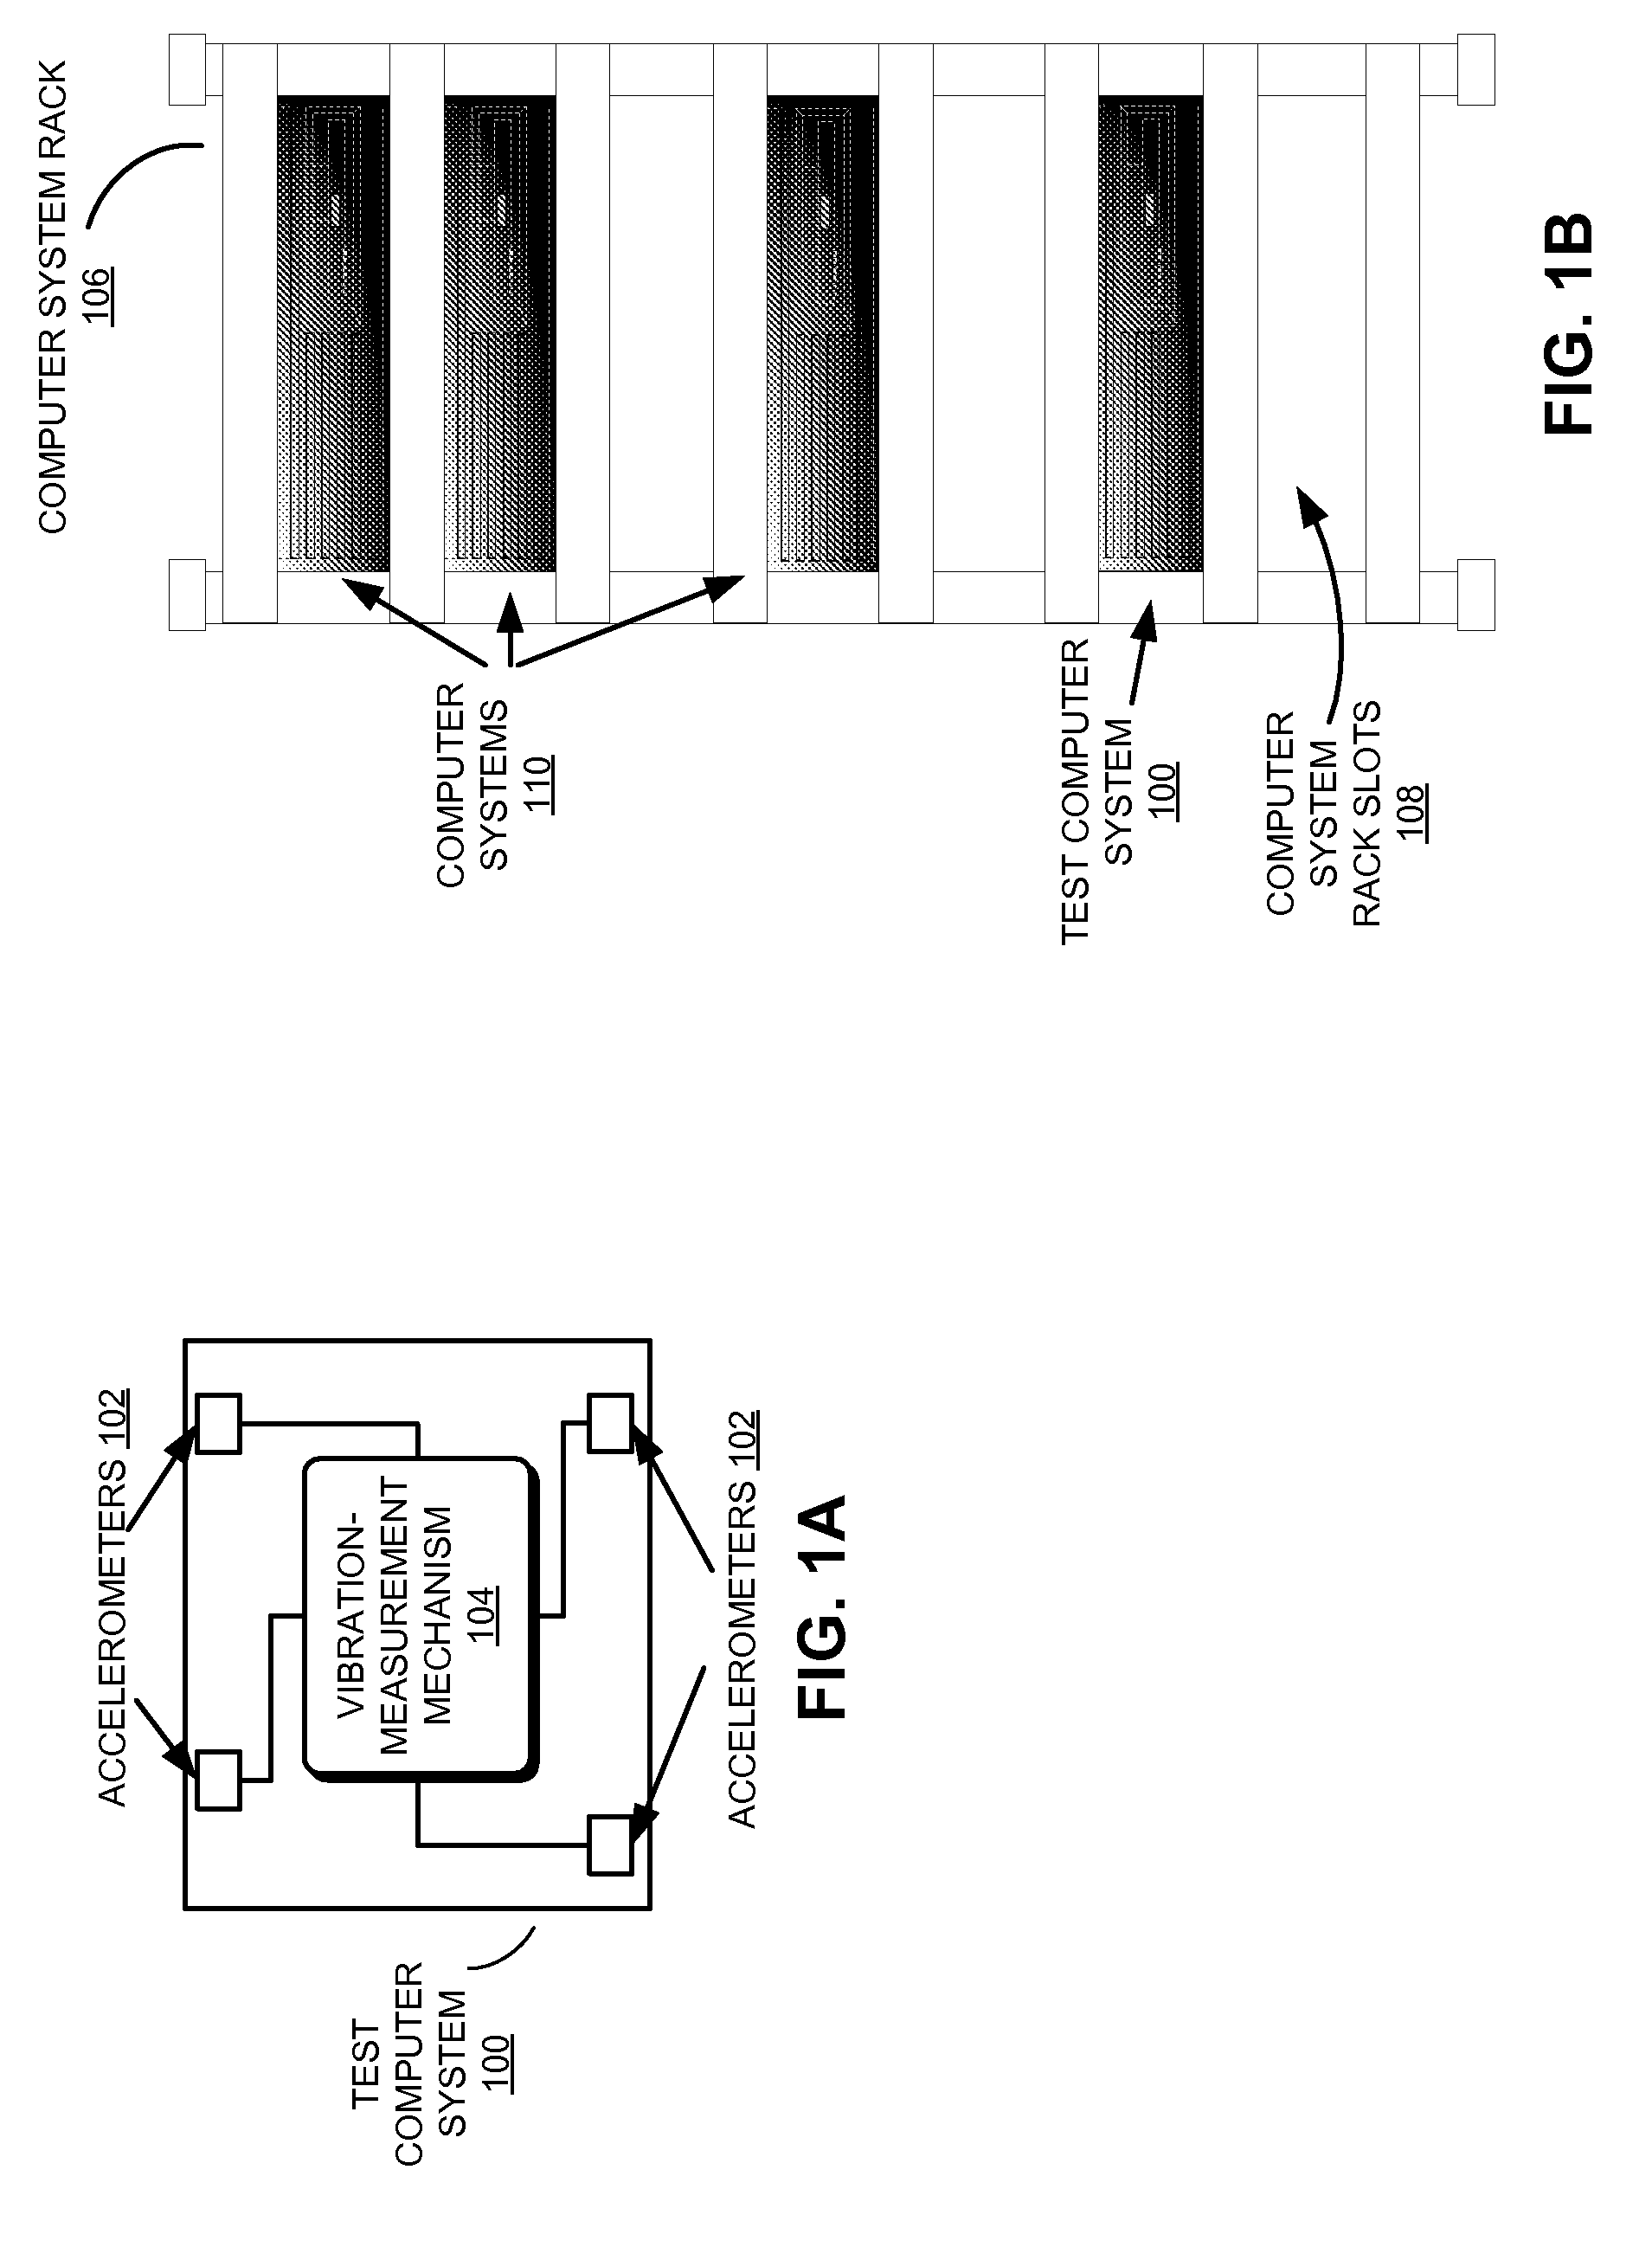 Generating a composite vibration profile for a computer system